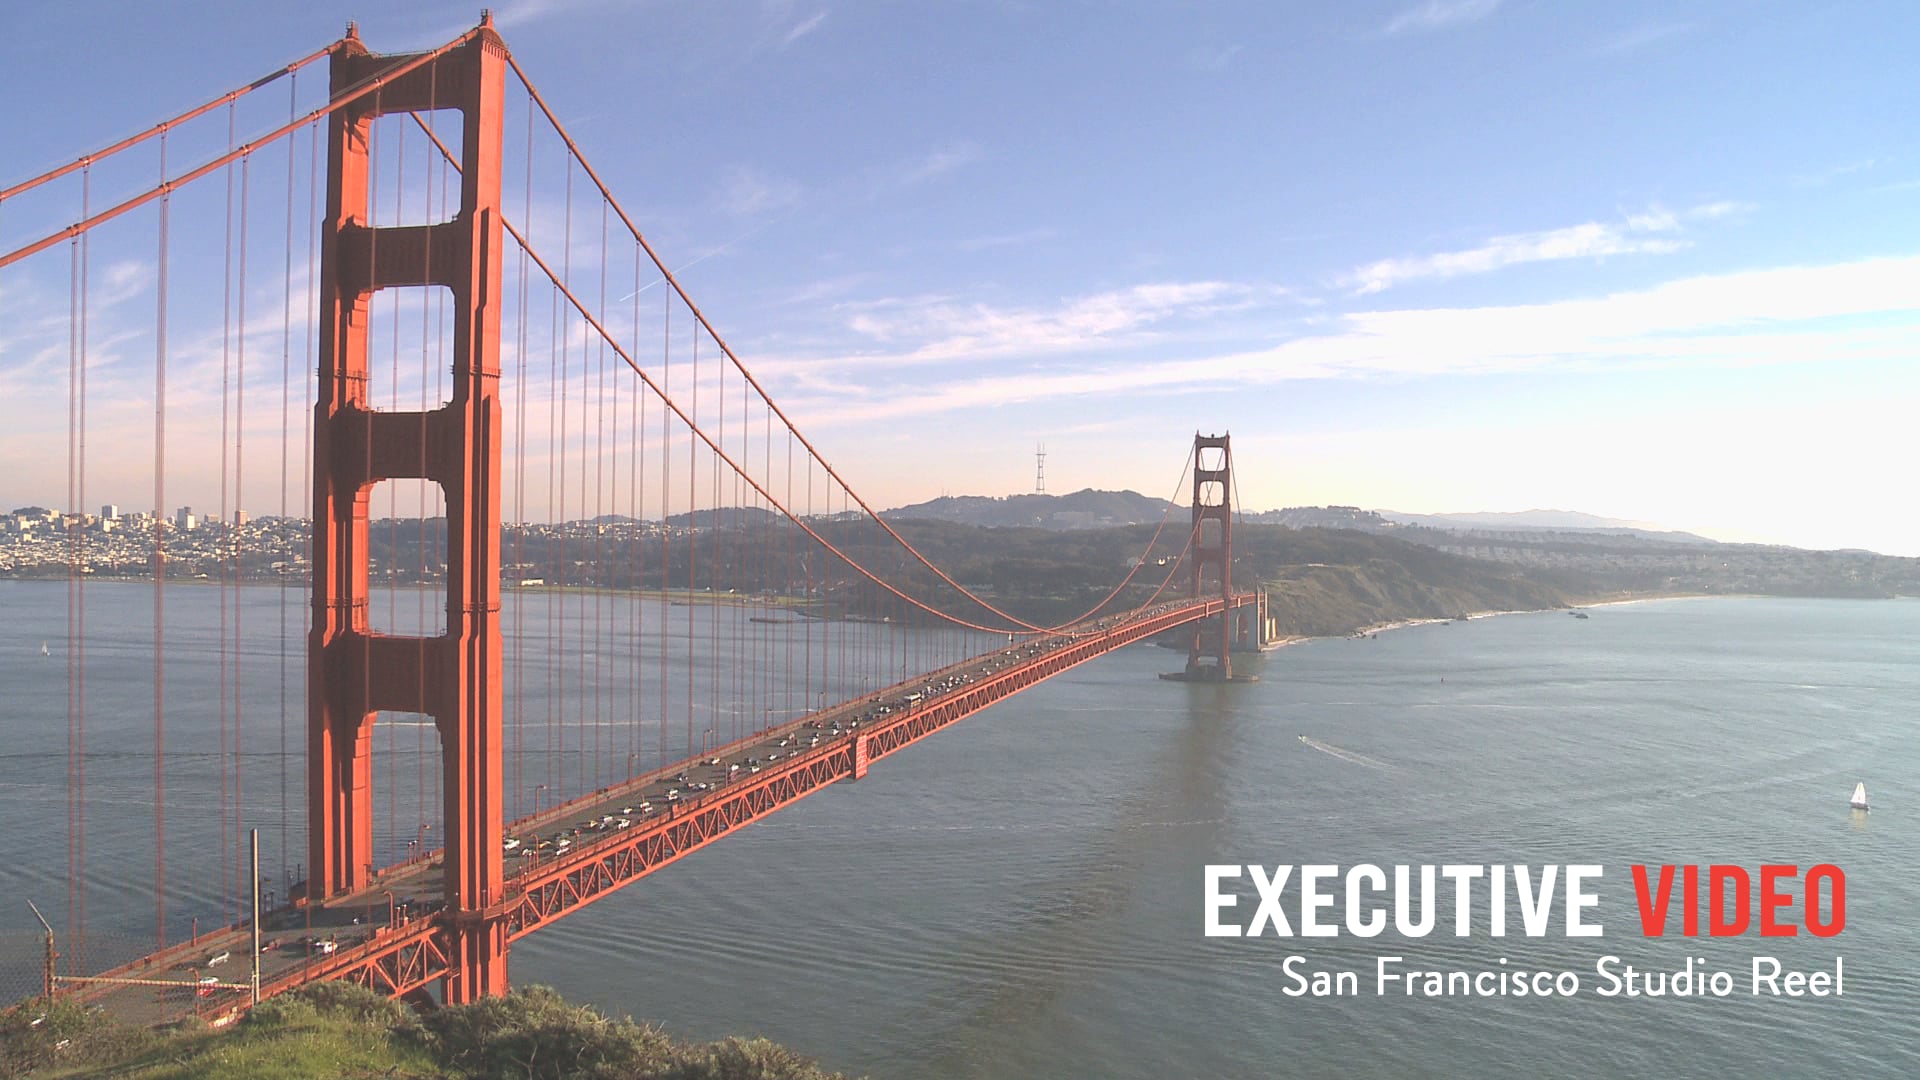 Sign Up for Executive Video's 2023 San Francisco Studio